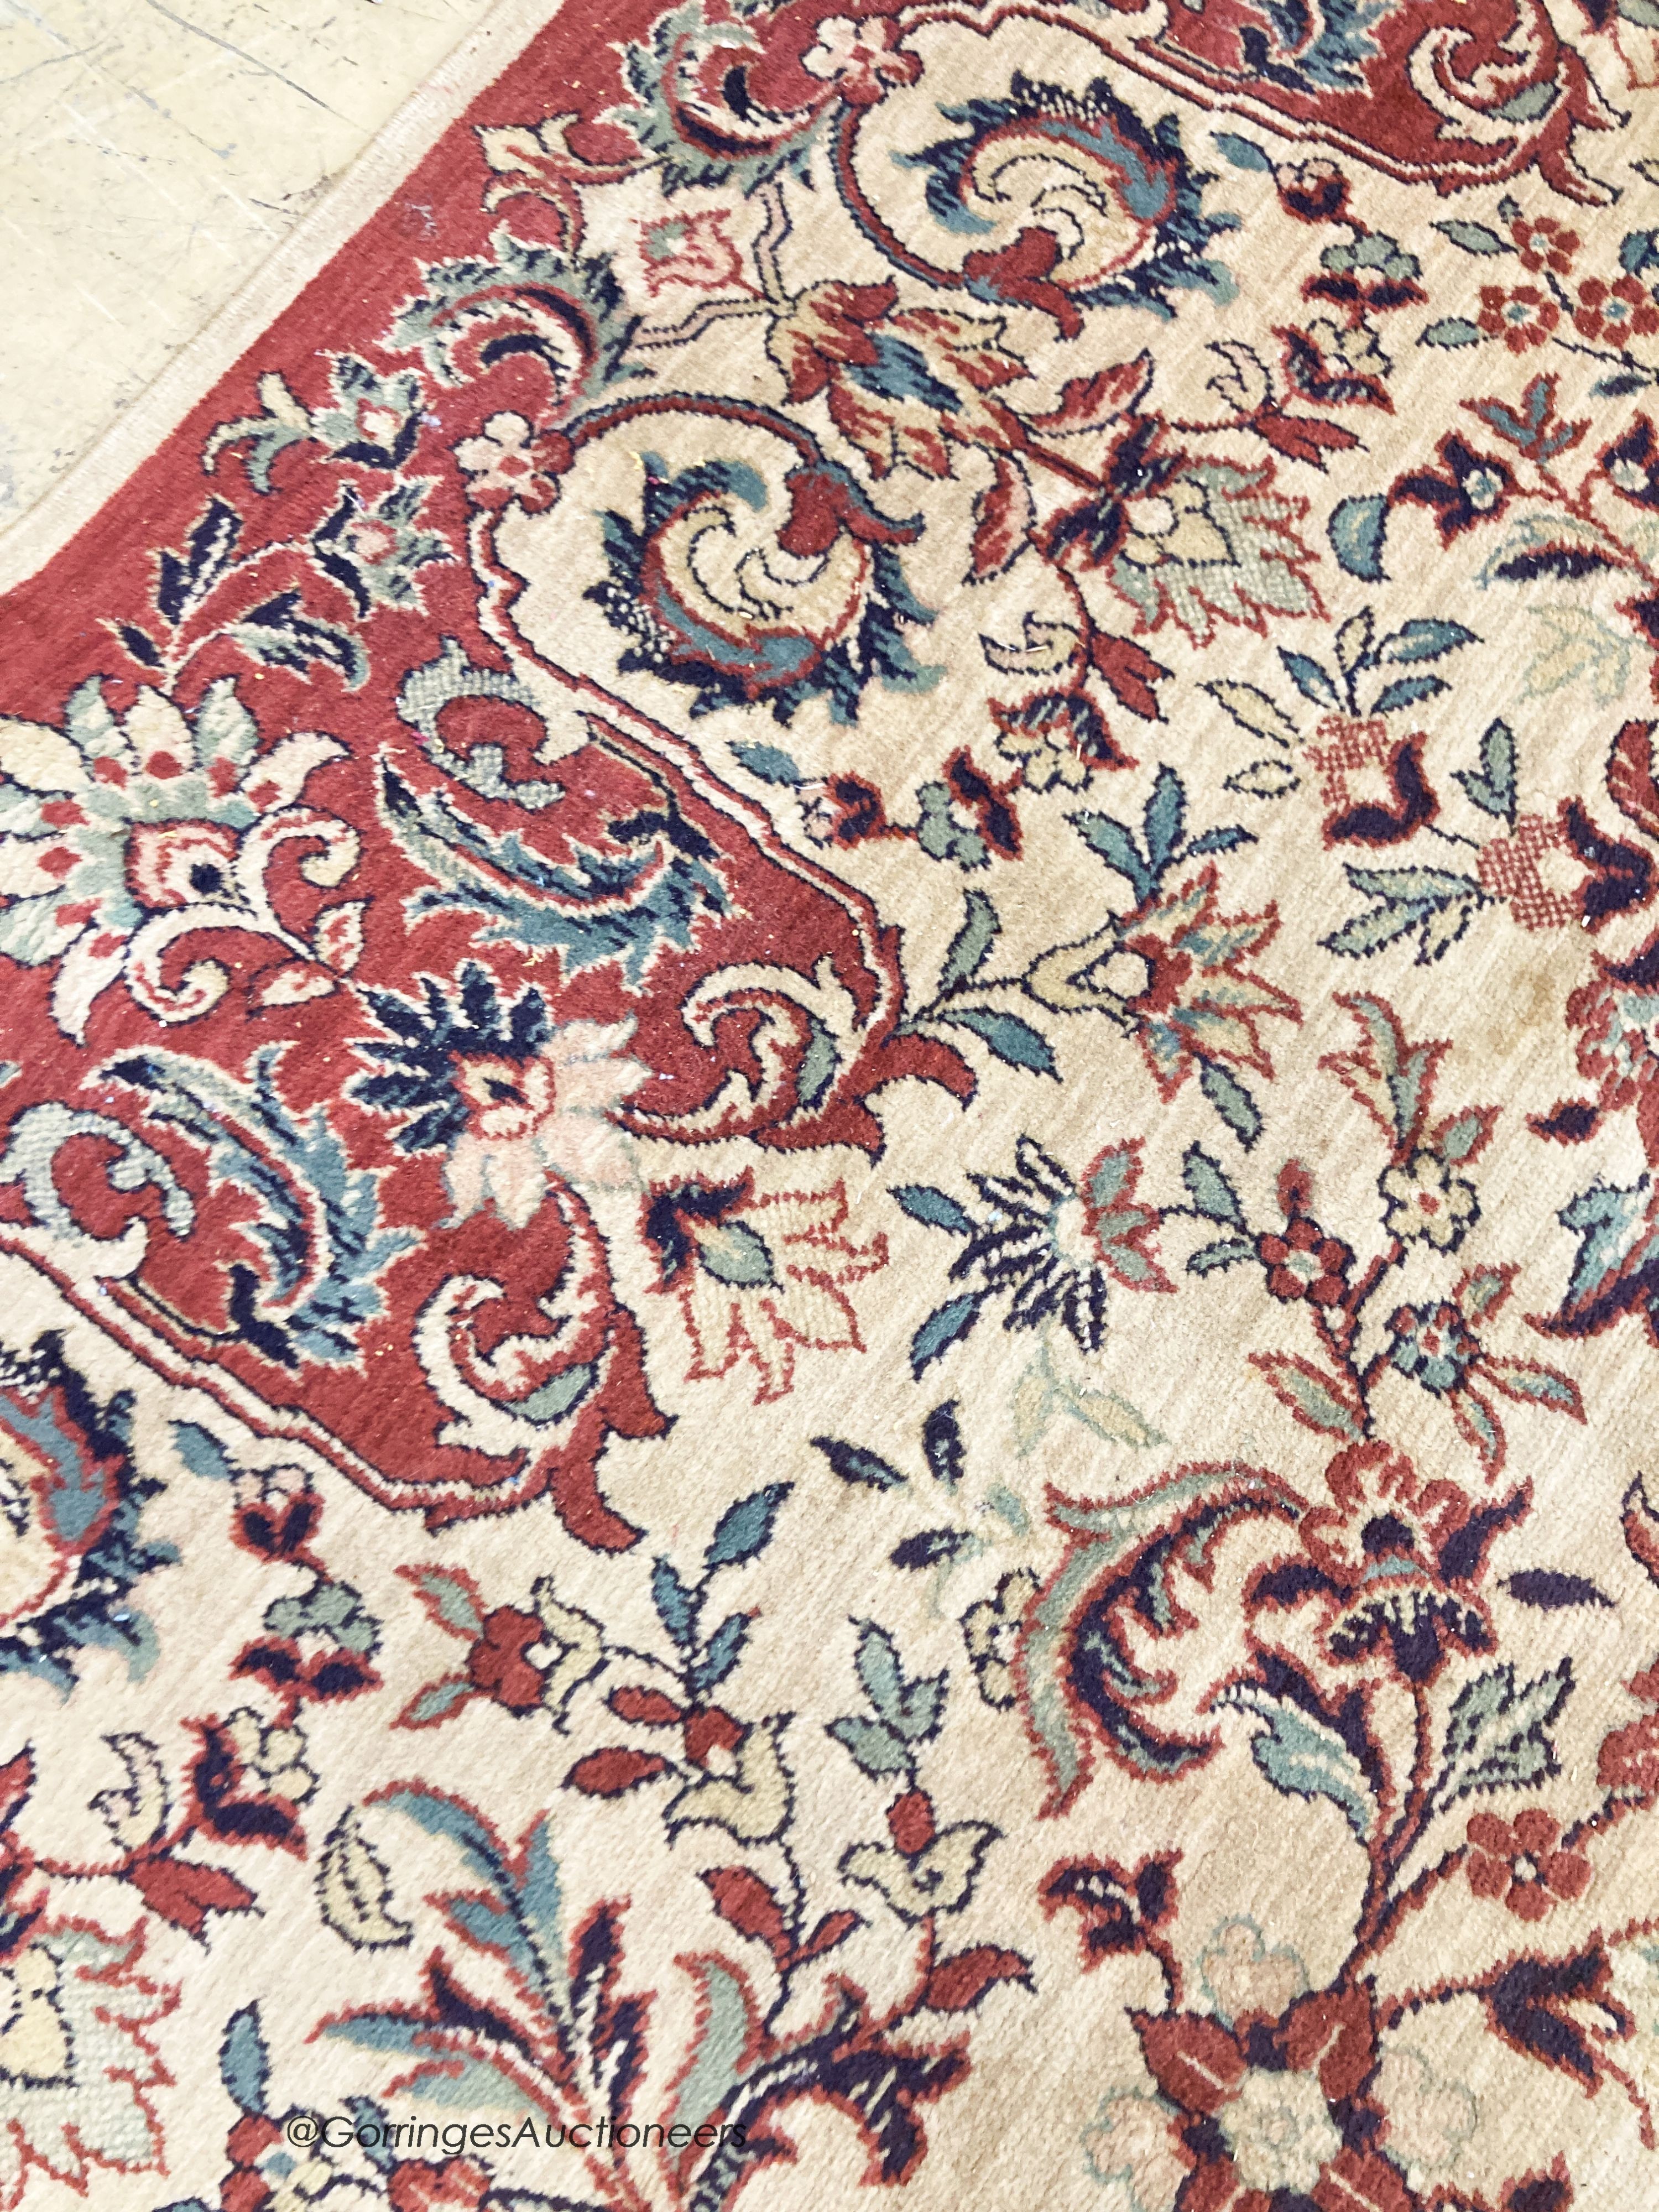 A Persian style ivory ground carpet, 380 x 280cm